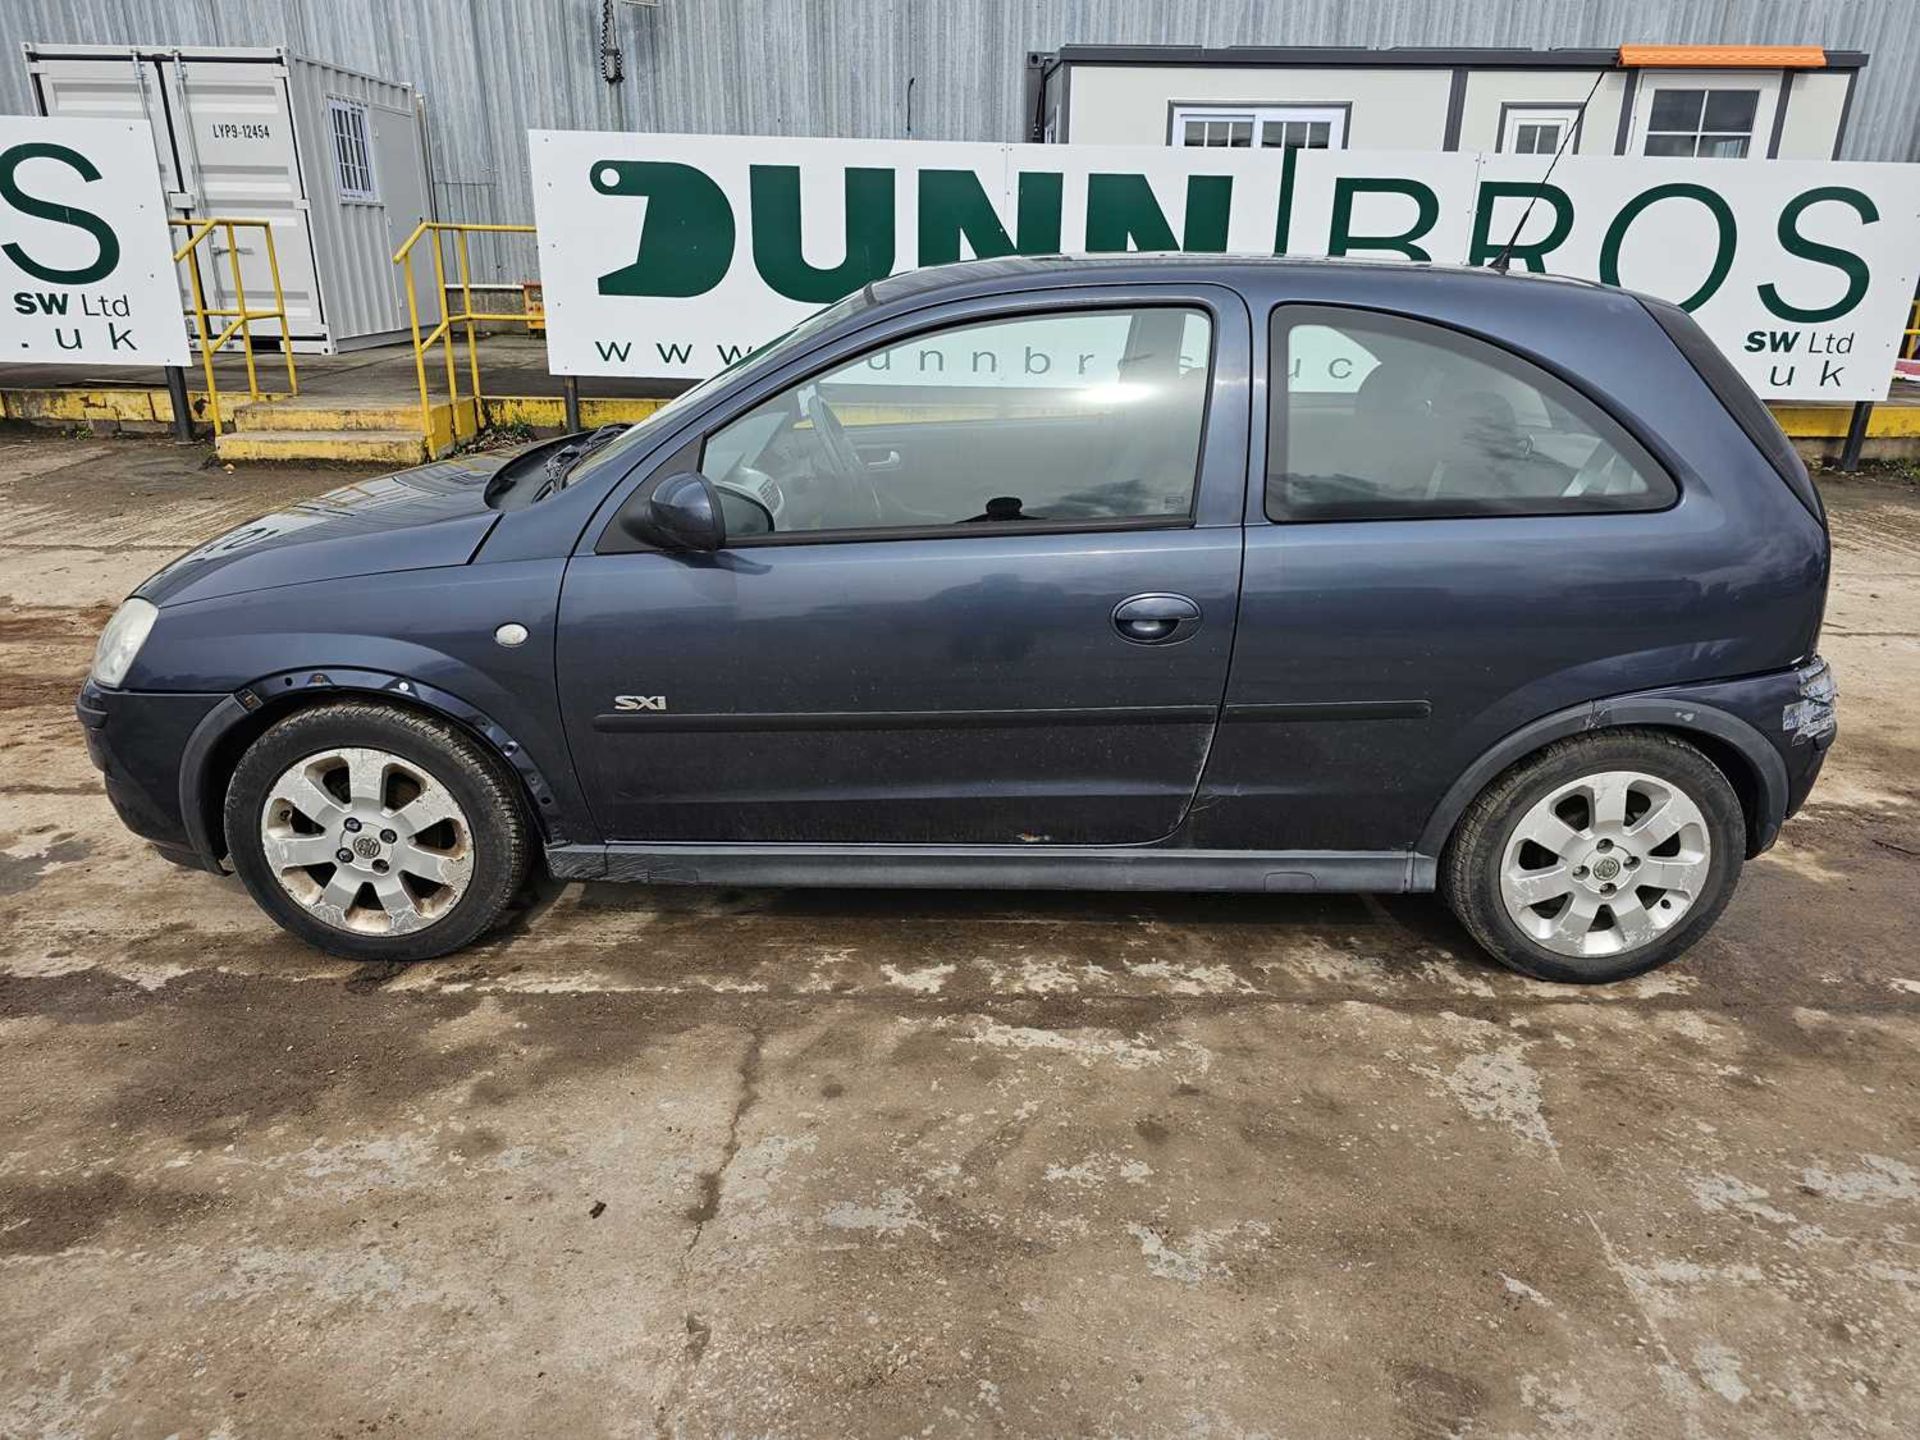 2005 Vauxhall Corsa SXi, 5 Speed, A/C (Reg. Docs. Available) - Image 2 of 24